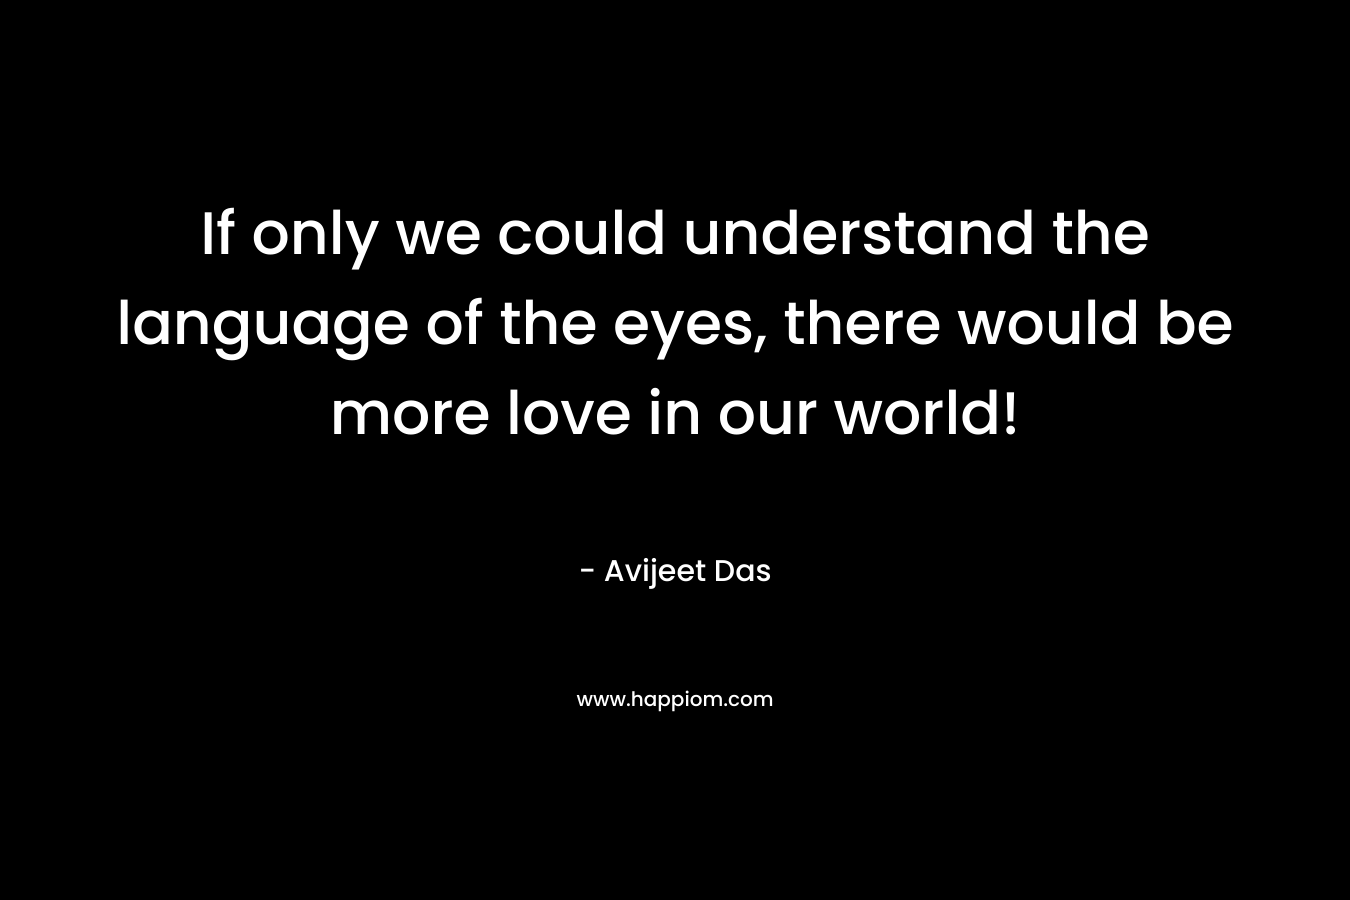 If only we could understand the language of the eyes, there would be more love in our world!